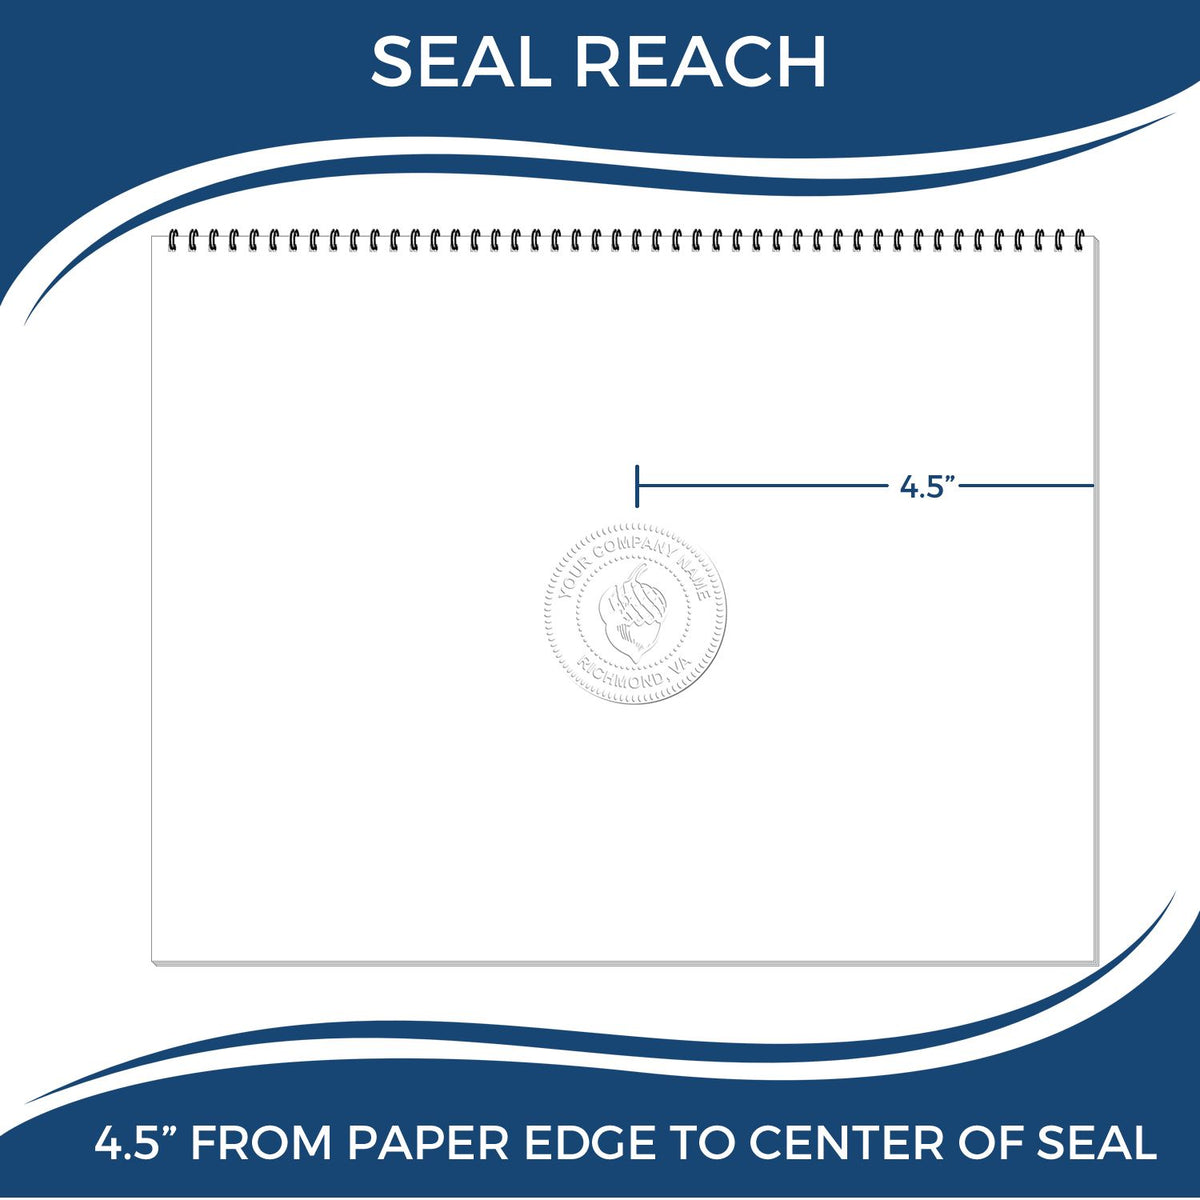 An infographic showing the seal reach which is represented by a ruler and a miniature seal image of the State of Arkansas Extended Long Reach Engineer Seal